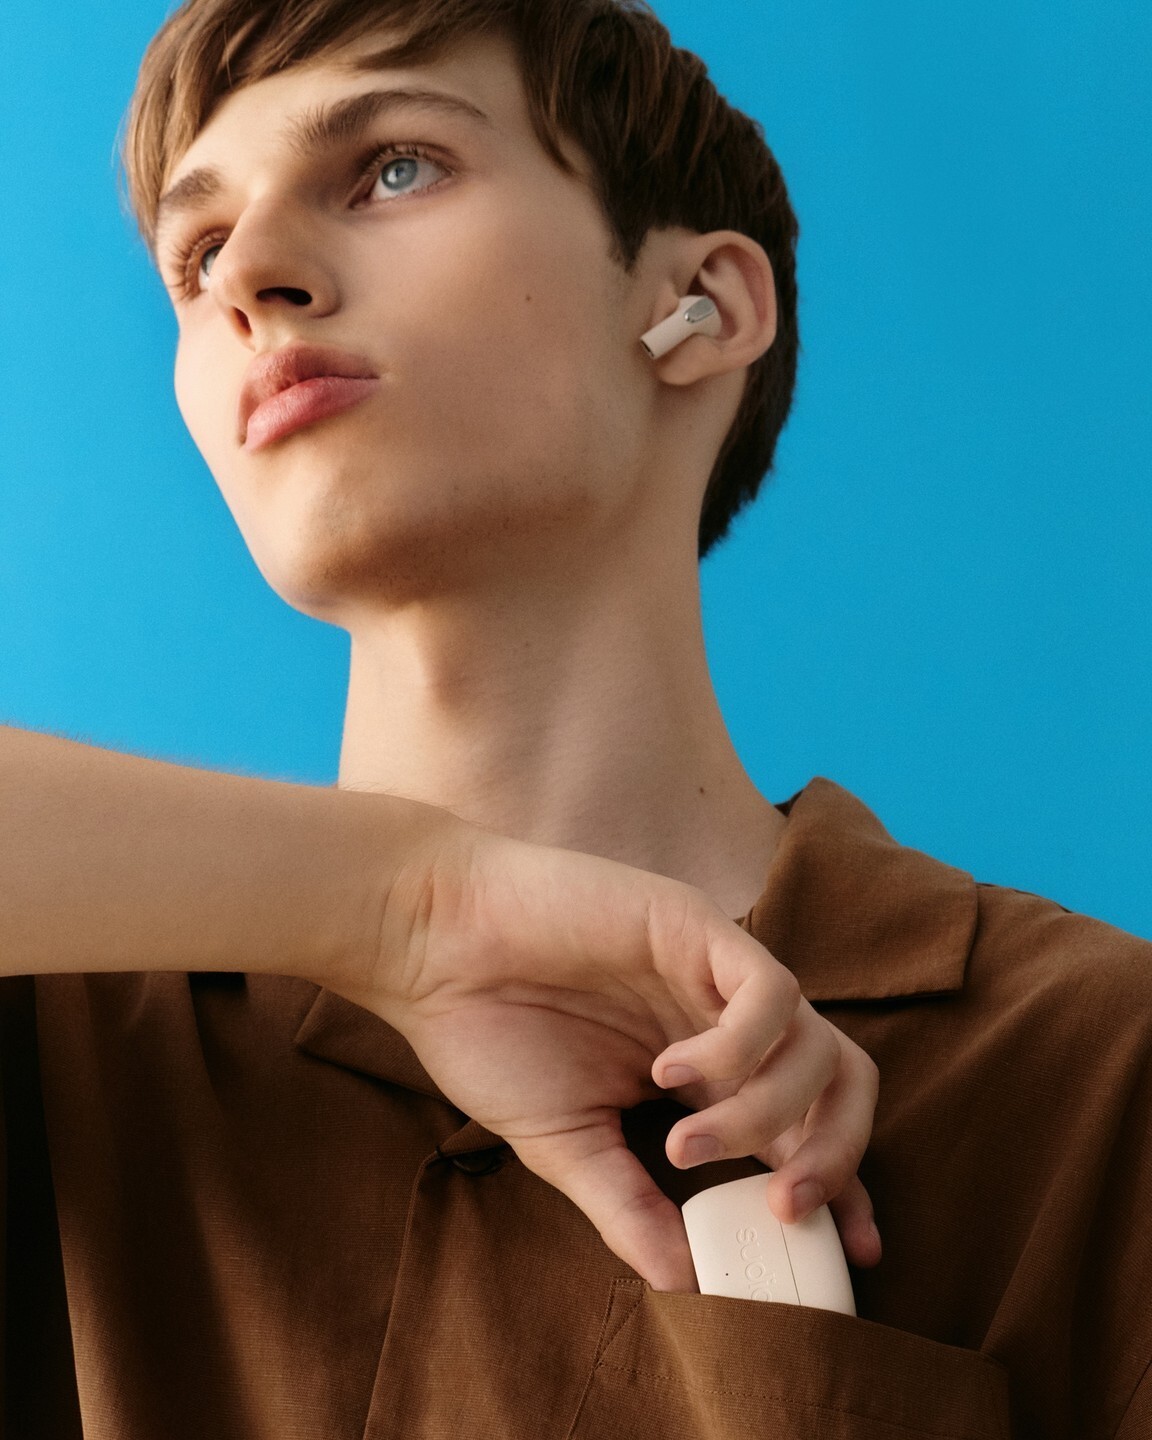 Fine earbuds just get better with age! Say hello to Sudio E3, the Hybrid Active Noise Cancelling Earbuds.⁠⁠✅An upgraded suite of our bestseller, the #SudioE2 ⁠✅Easy maintain, longer lasting case⁠✅AAC Codec gives you an sensational sound experience ⁠⁠E3 is now available in select countries.⁠Make sure to check on our website for a first peek.⁠⁠#sudio #shapingsound #SudioE3 #E3White #E3Black